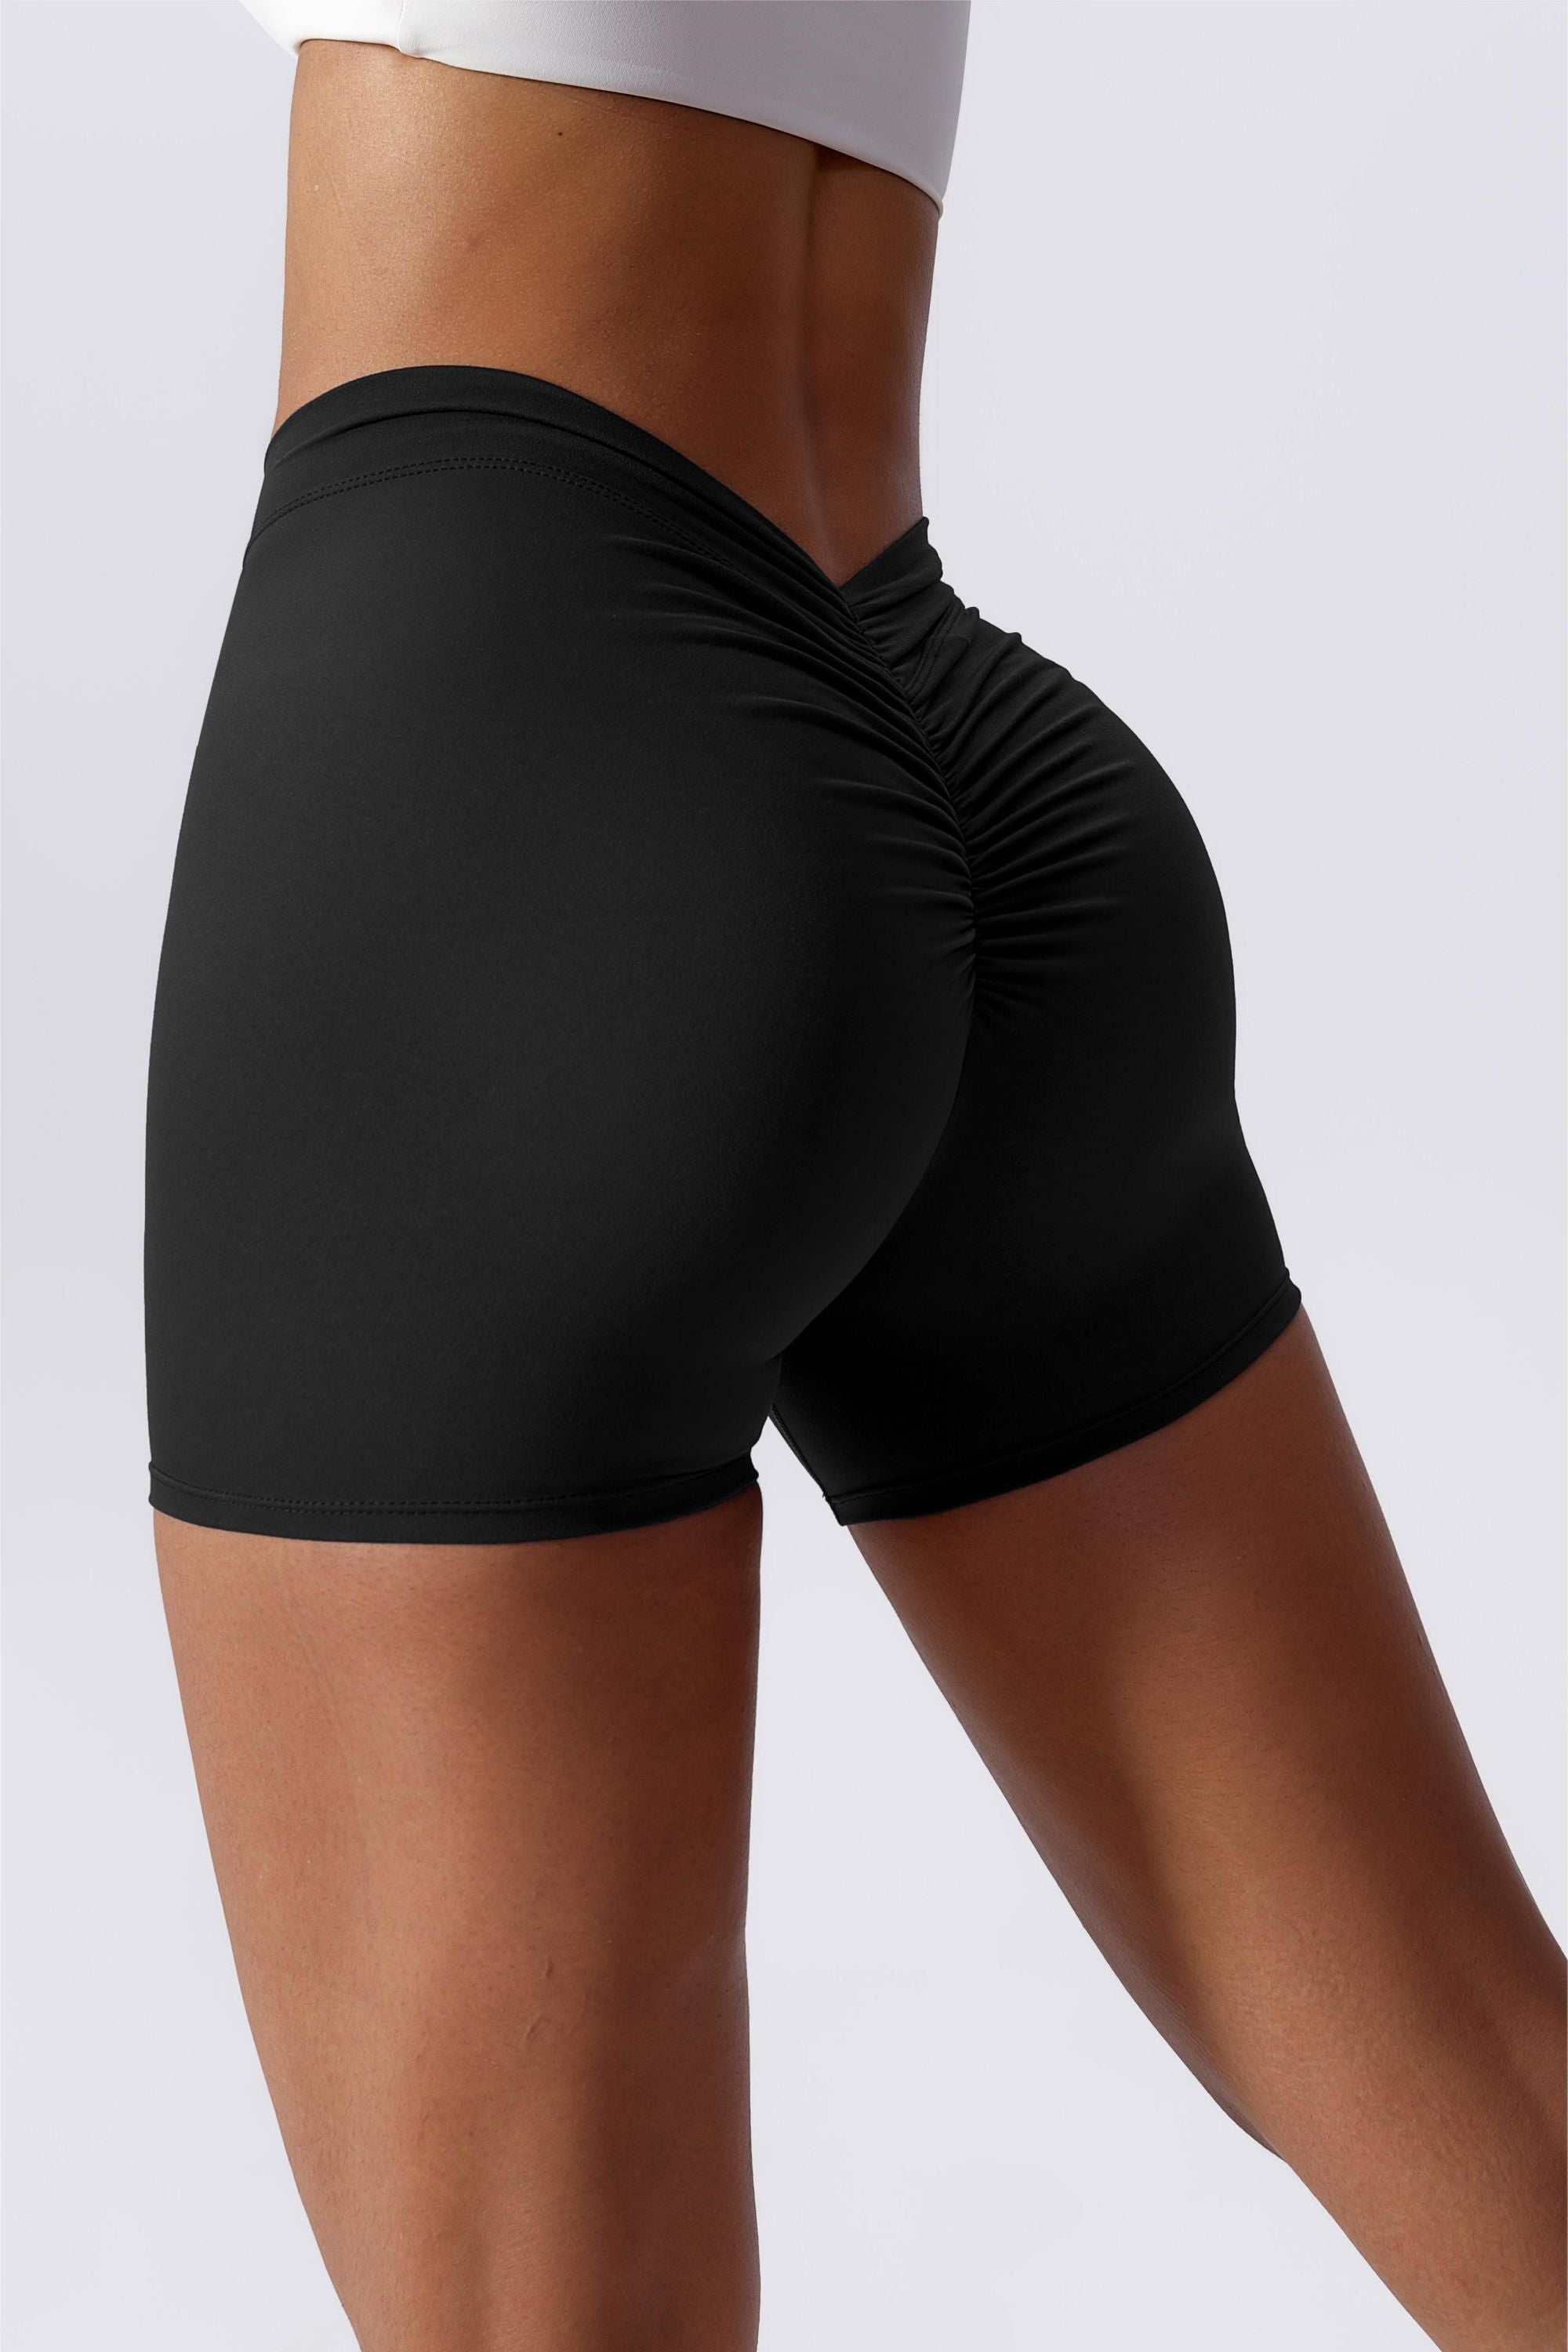 Zioccie V-Back Scrunch Butt Lifting Shorts for Women Workout Gym Yoga  Running Active Exercise Fitness Shorts (Black, Small) at  Women's  Clothing store